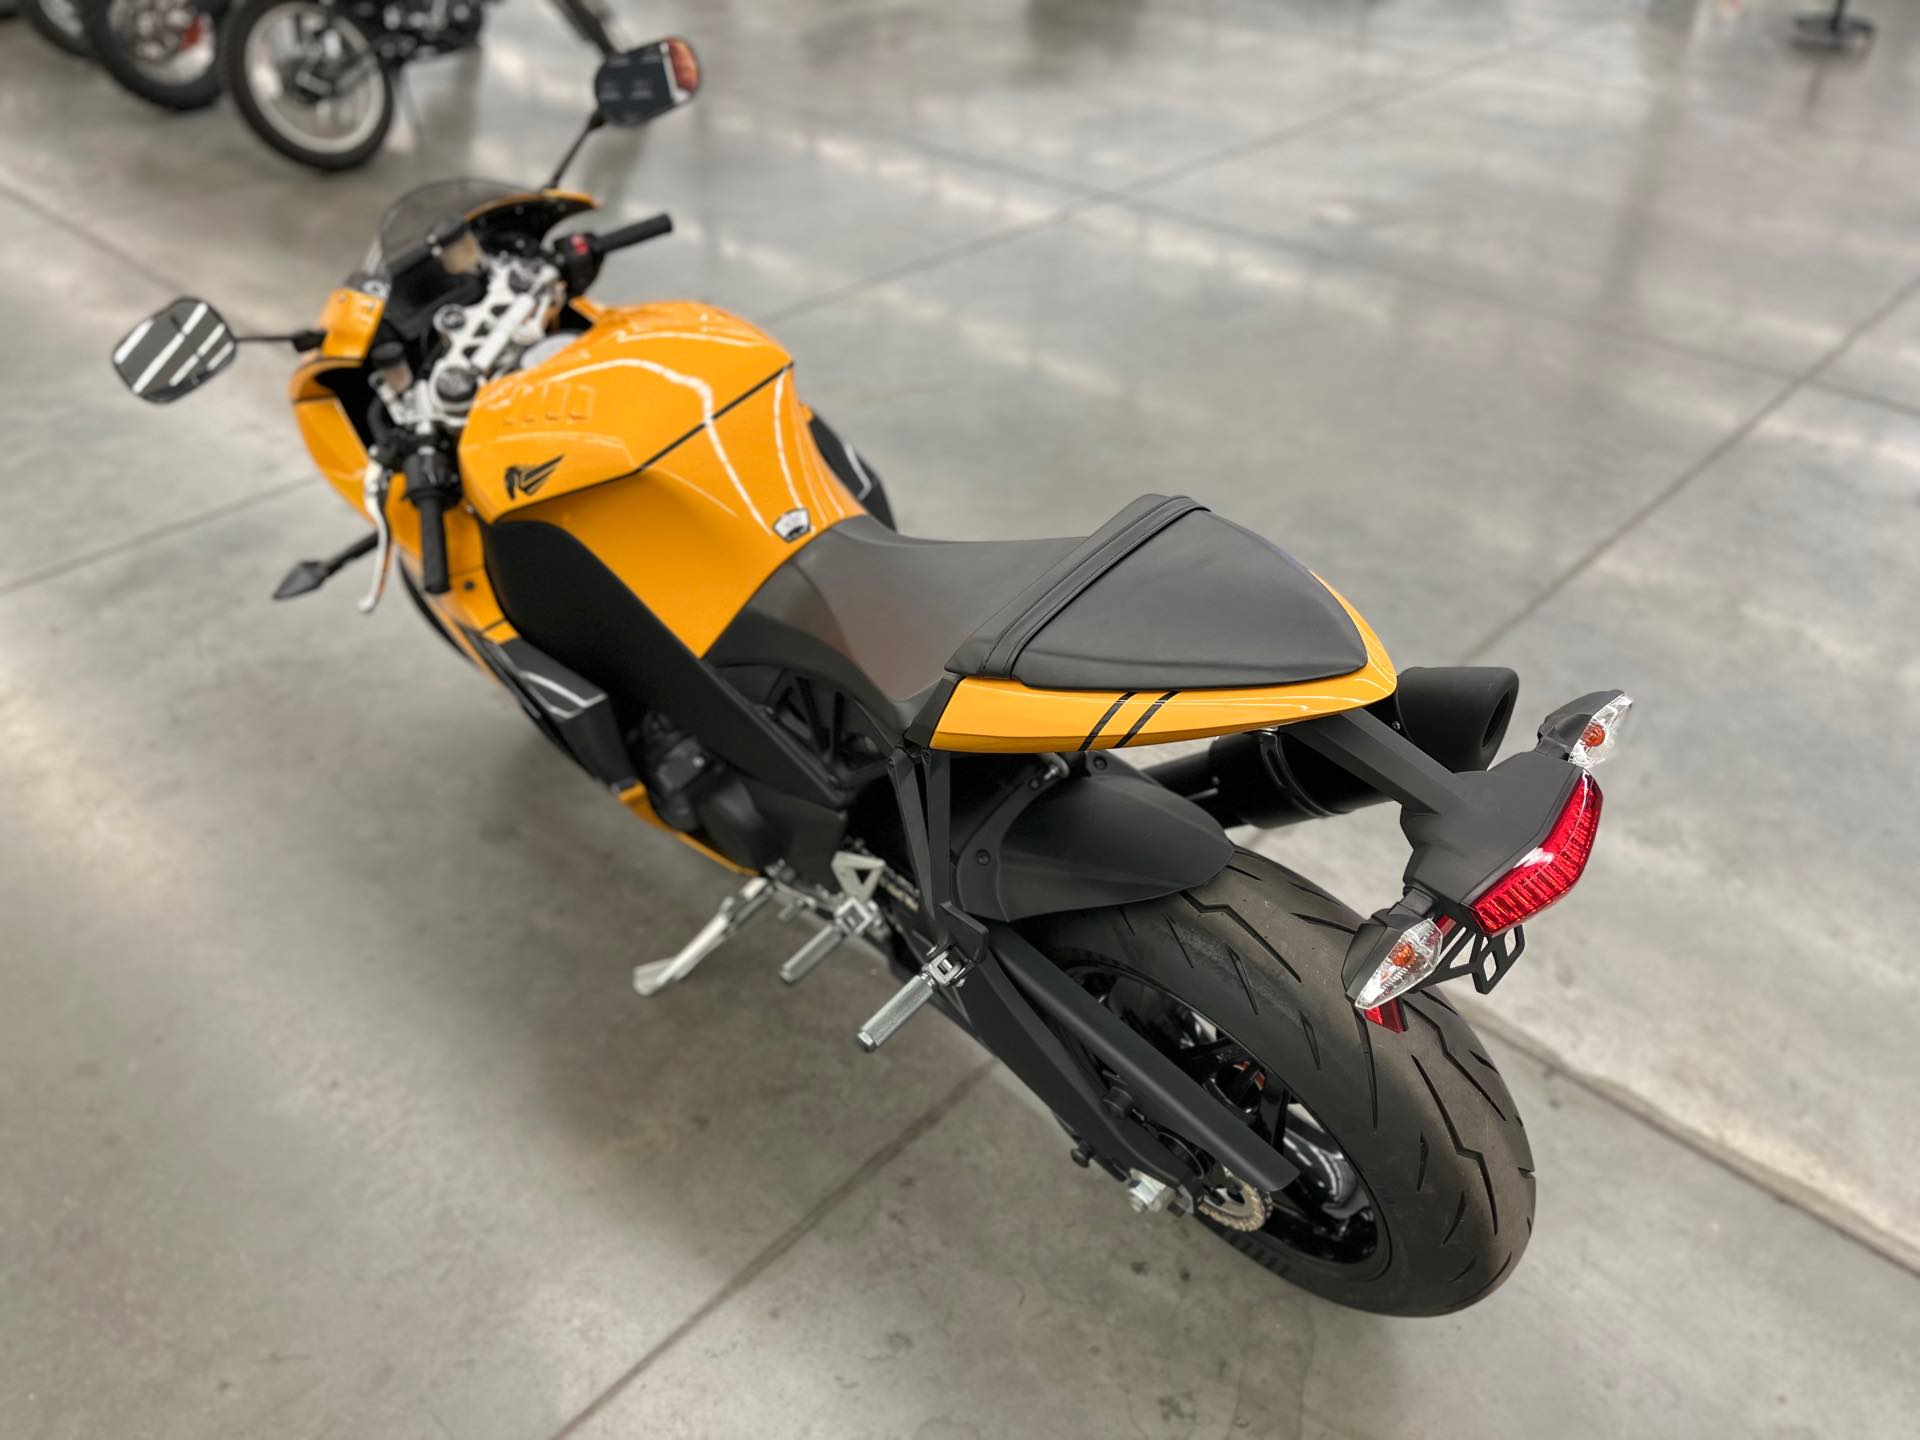 2022 BUELL HH1190RX at Aces Motorcycles - Denver